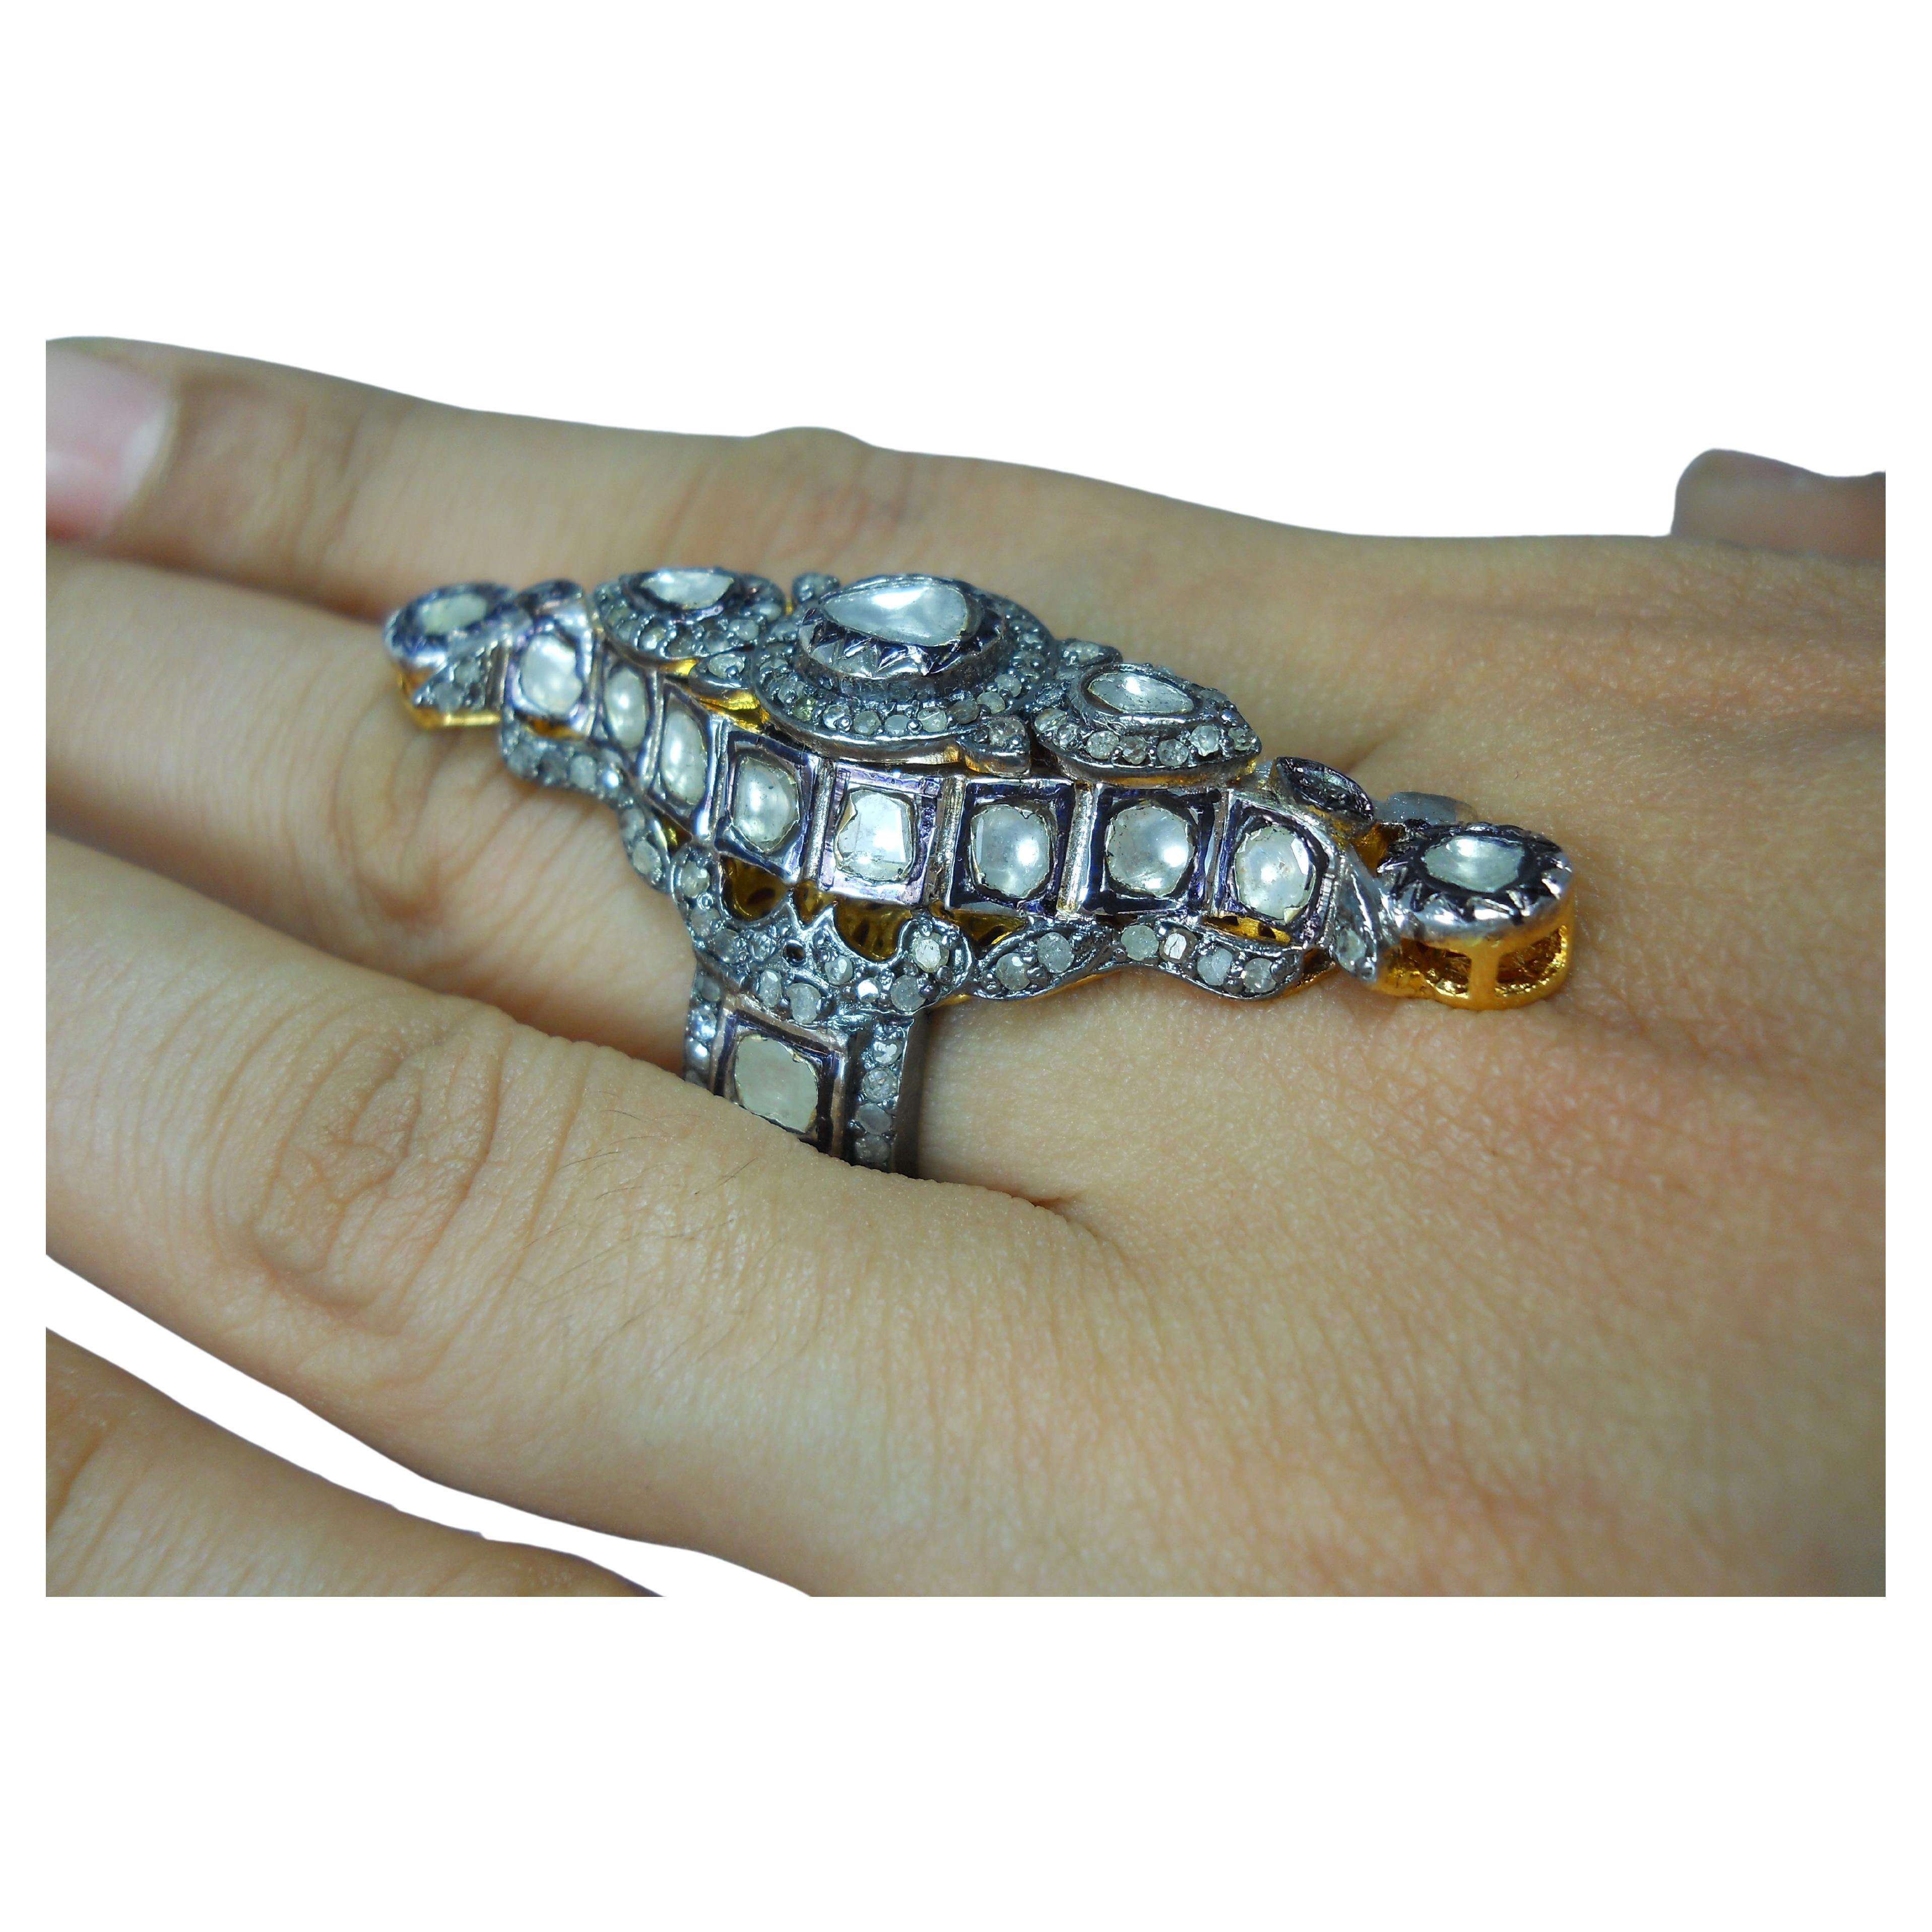 -Diamond type- Natural rose cut, natural uncut diamond

-Diamond color- white with a tint of grey

-Diamond weight- 6.90ctw

-Metal- 925 Sterling silver

Metal color- oxidized silver and yellow gold plated
